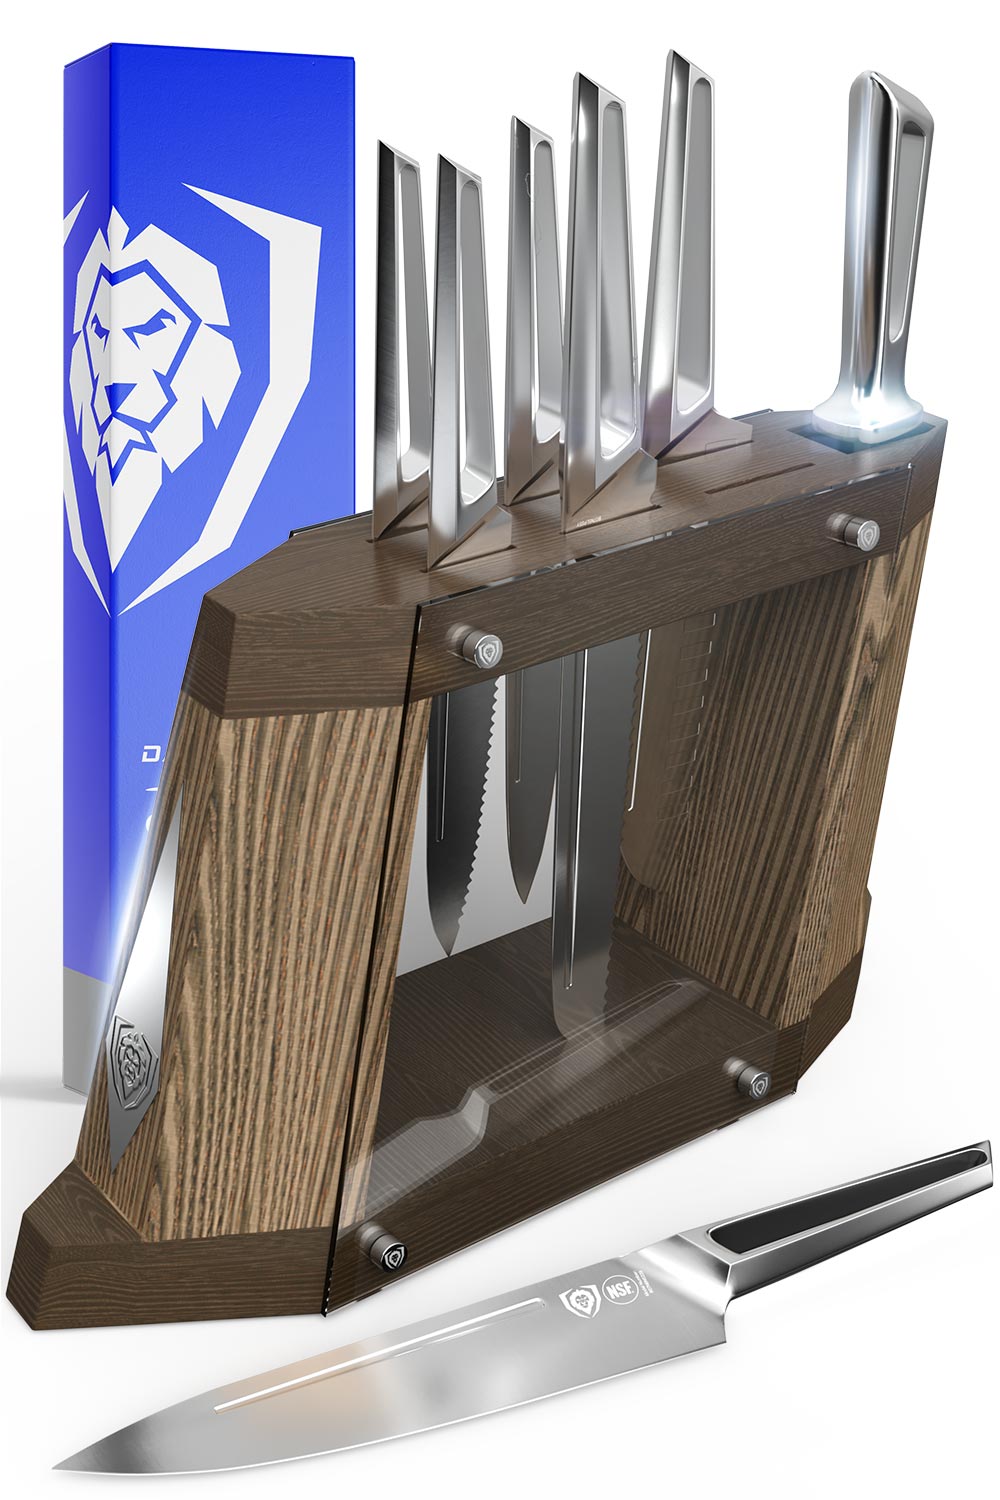 Dalstrong crusader series 8 piece knife block set in front of it's premium packaging.